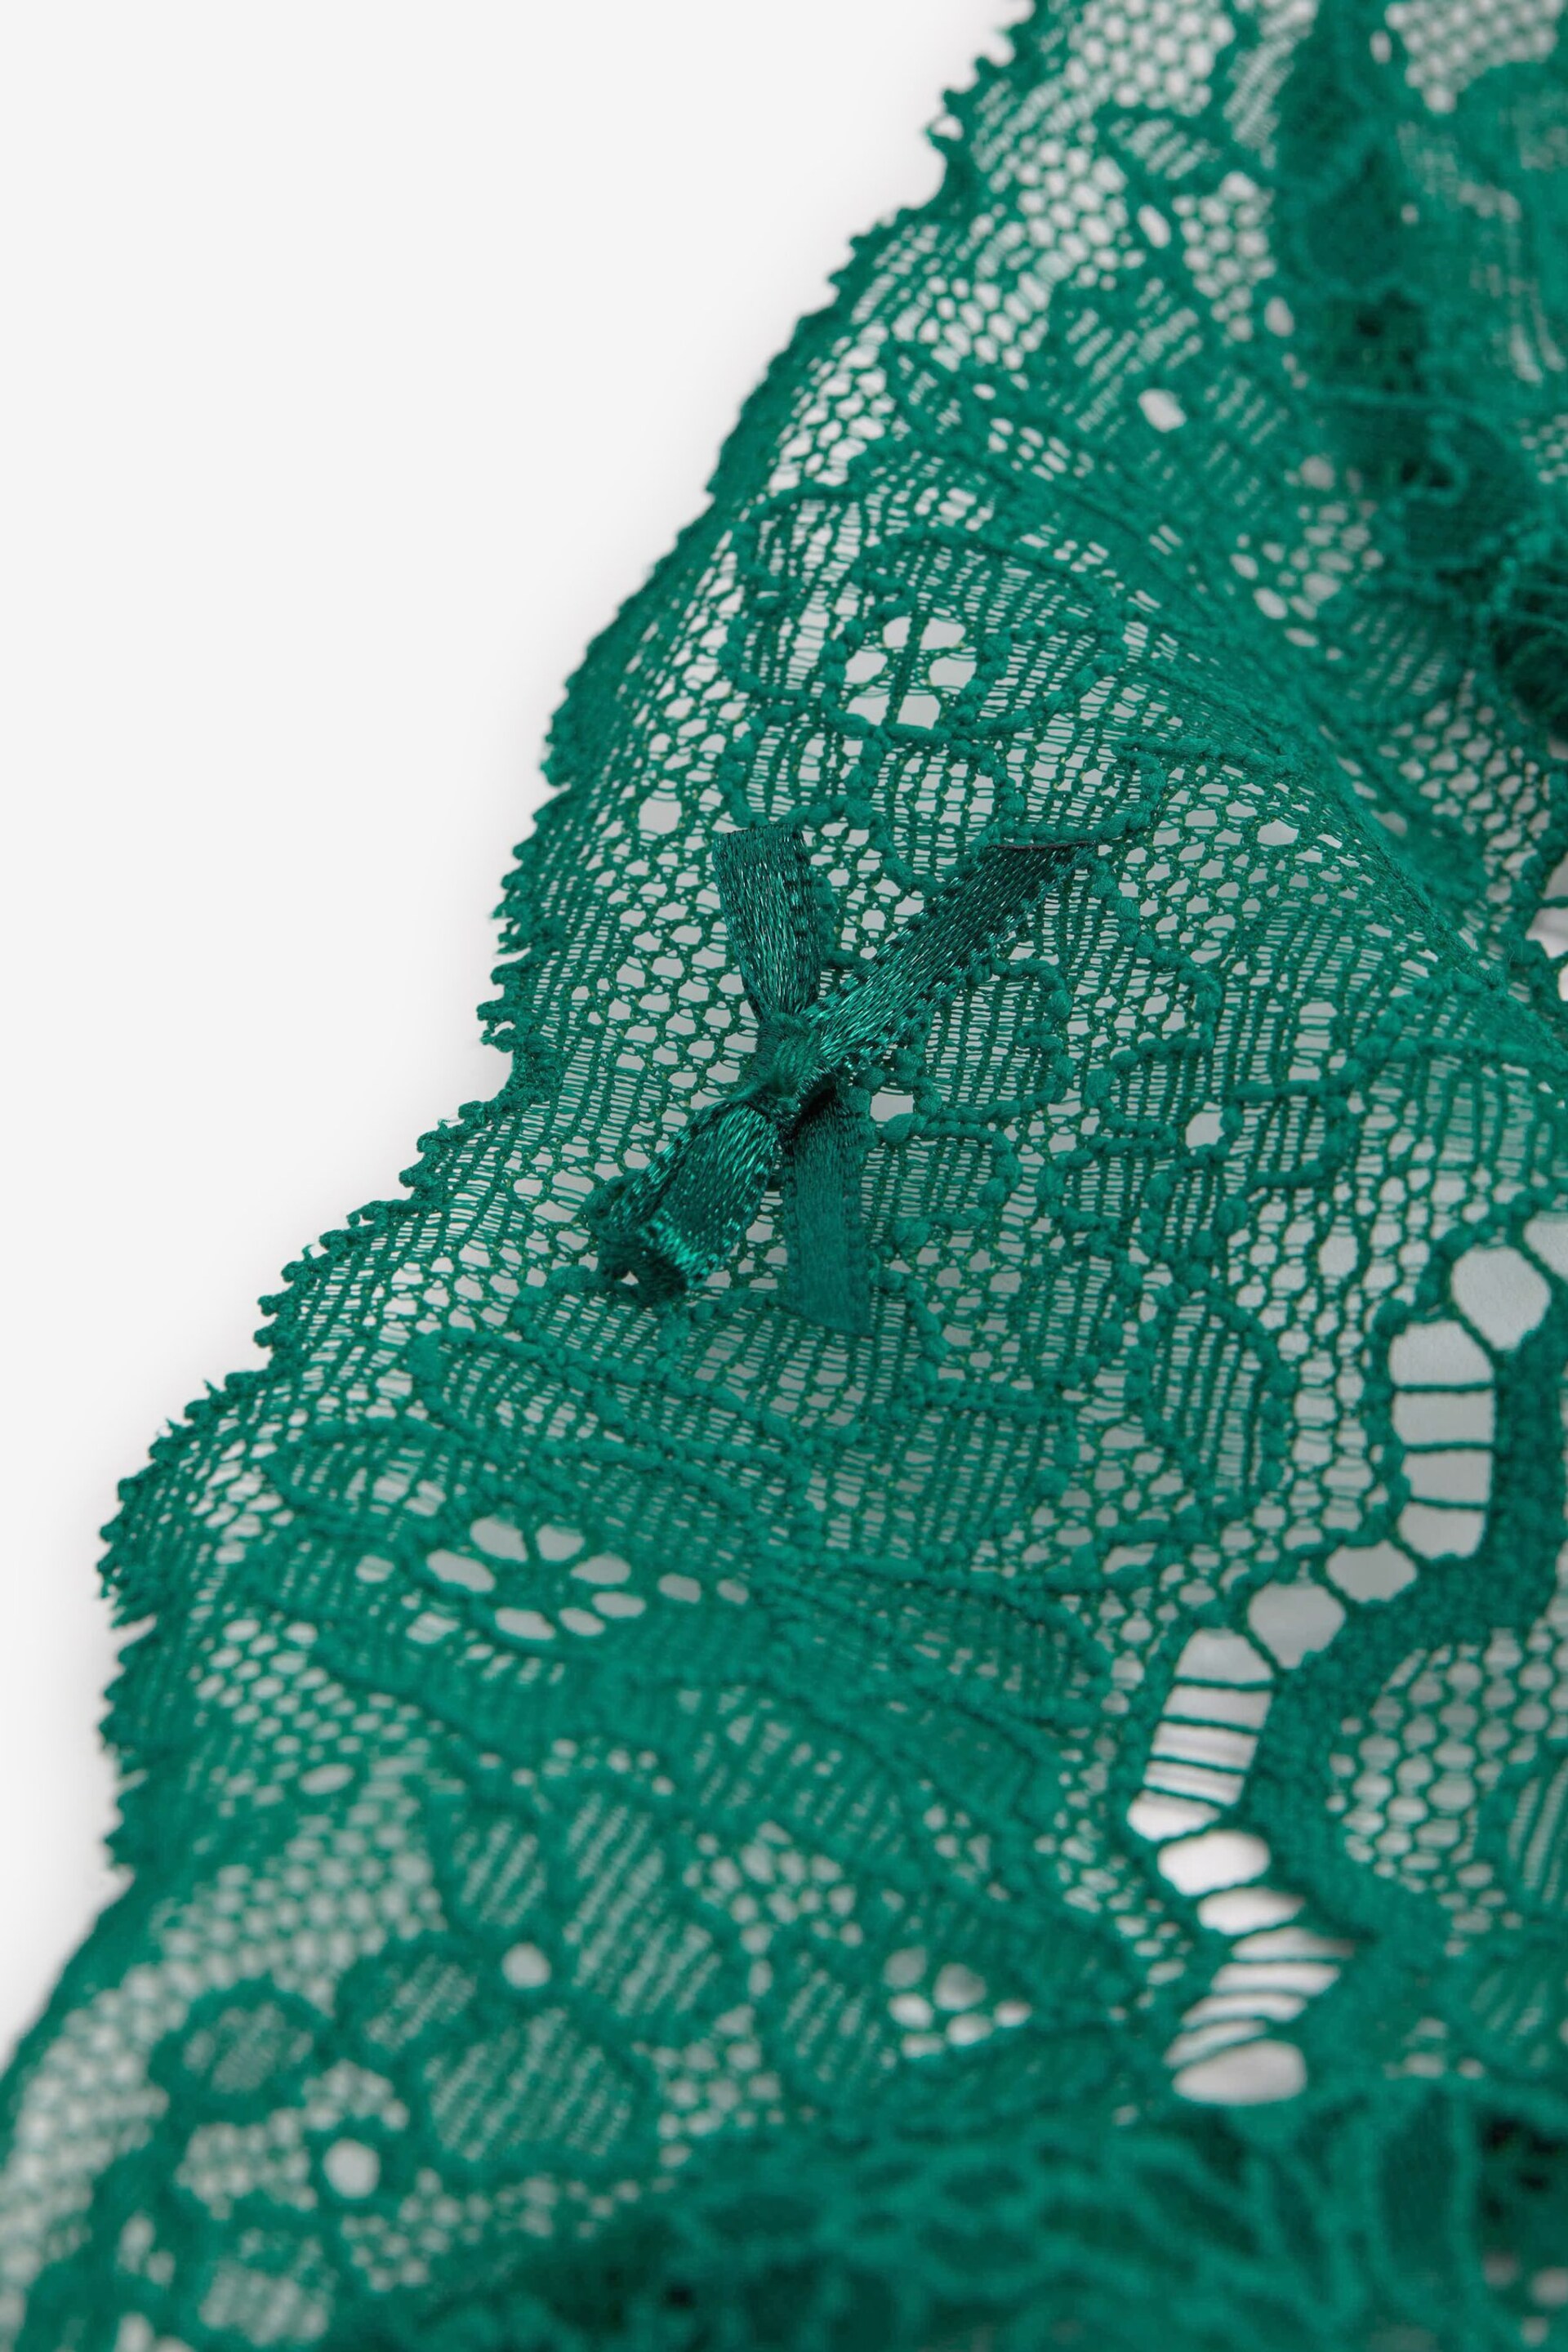 Victoria's Secret Spruce Green Cheeky Knickers - Image 3 of 3